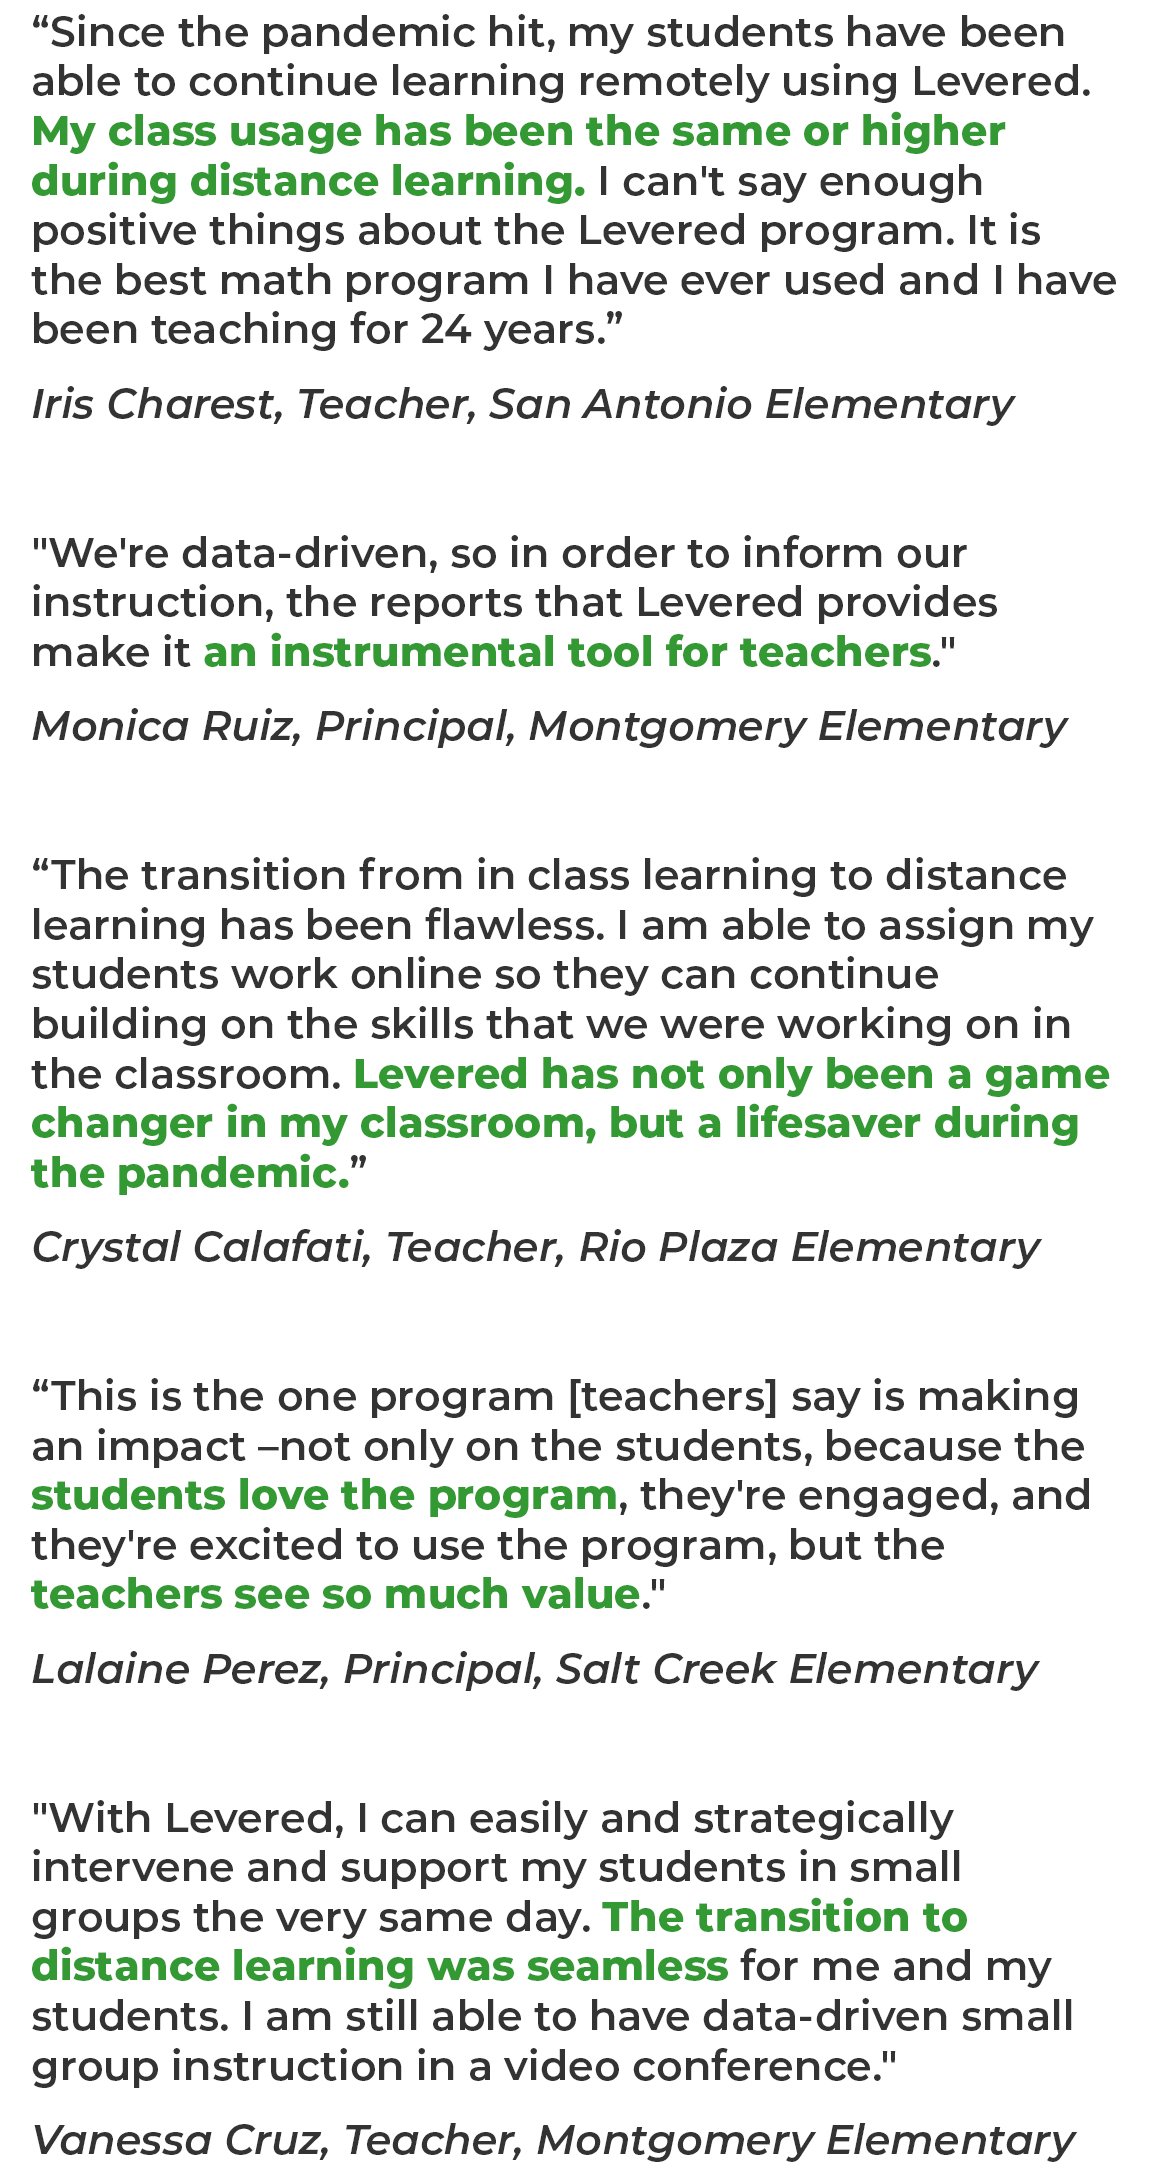 Testimonial quotes from teachers, and principals